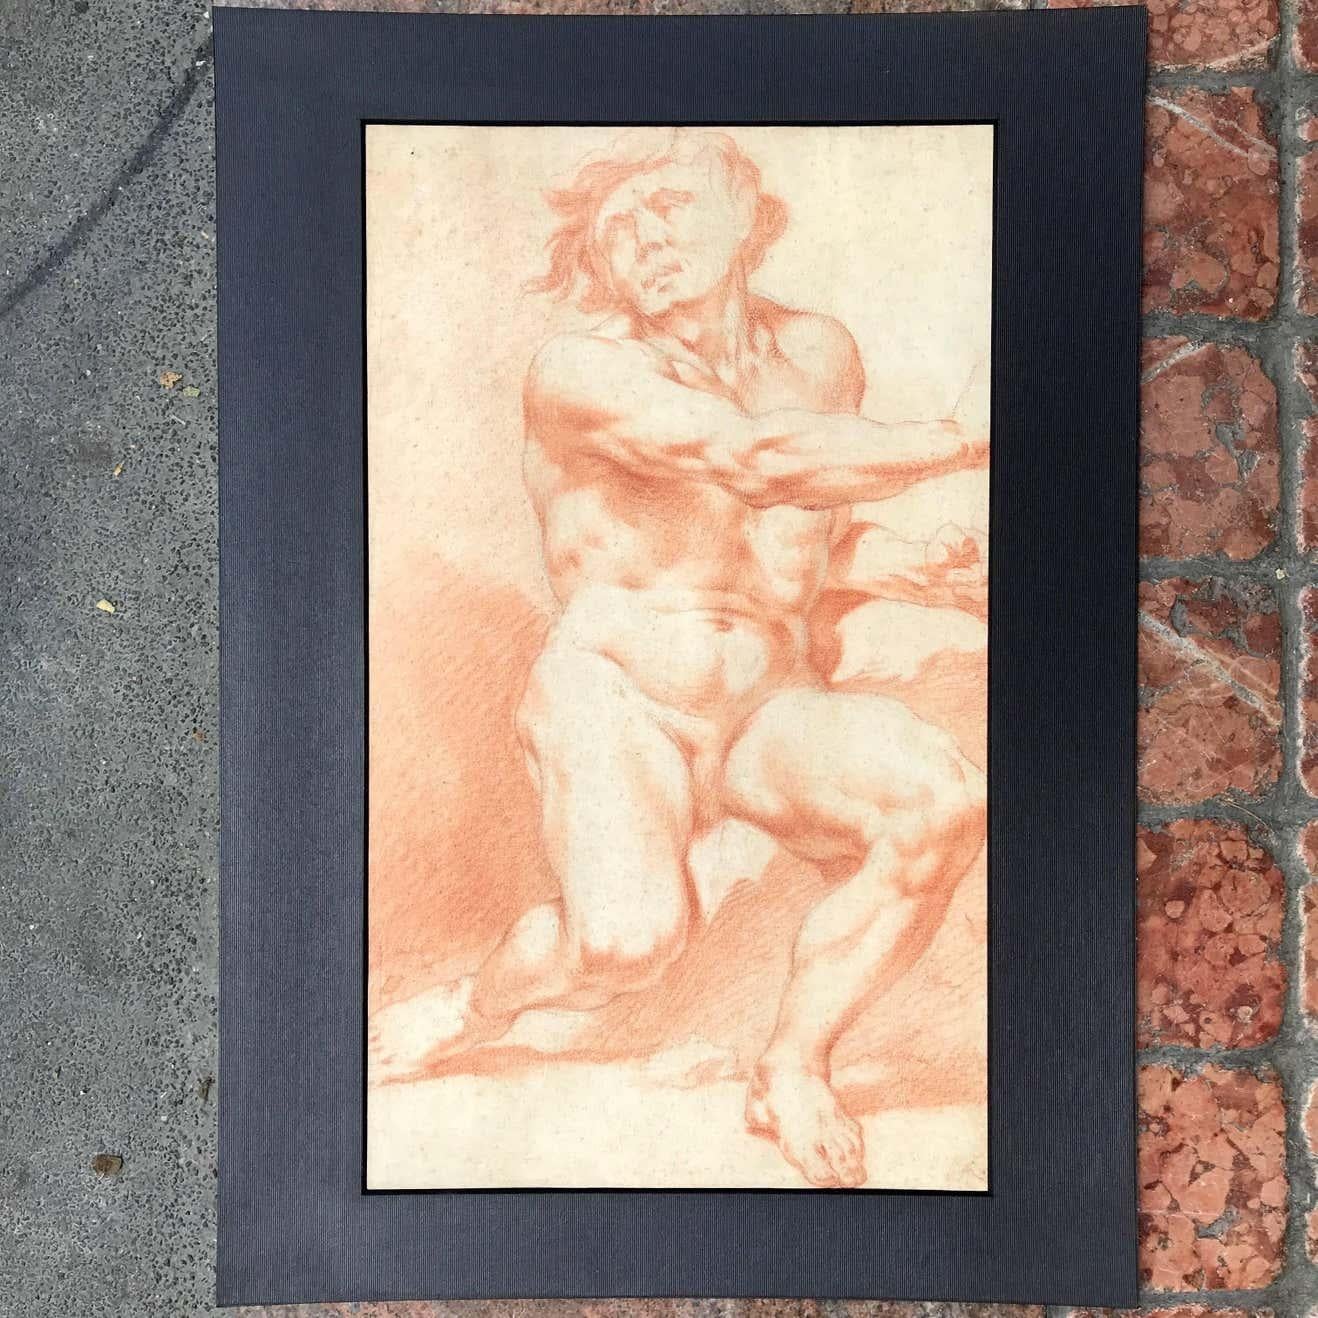 Pair of Neoclassical period red sanguine on paper drawings of seated male nudes, two academical studies of nude men, Italian drawing works on paper after Procaccini, dating back to late 18th century.
Both works come from a private collection in